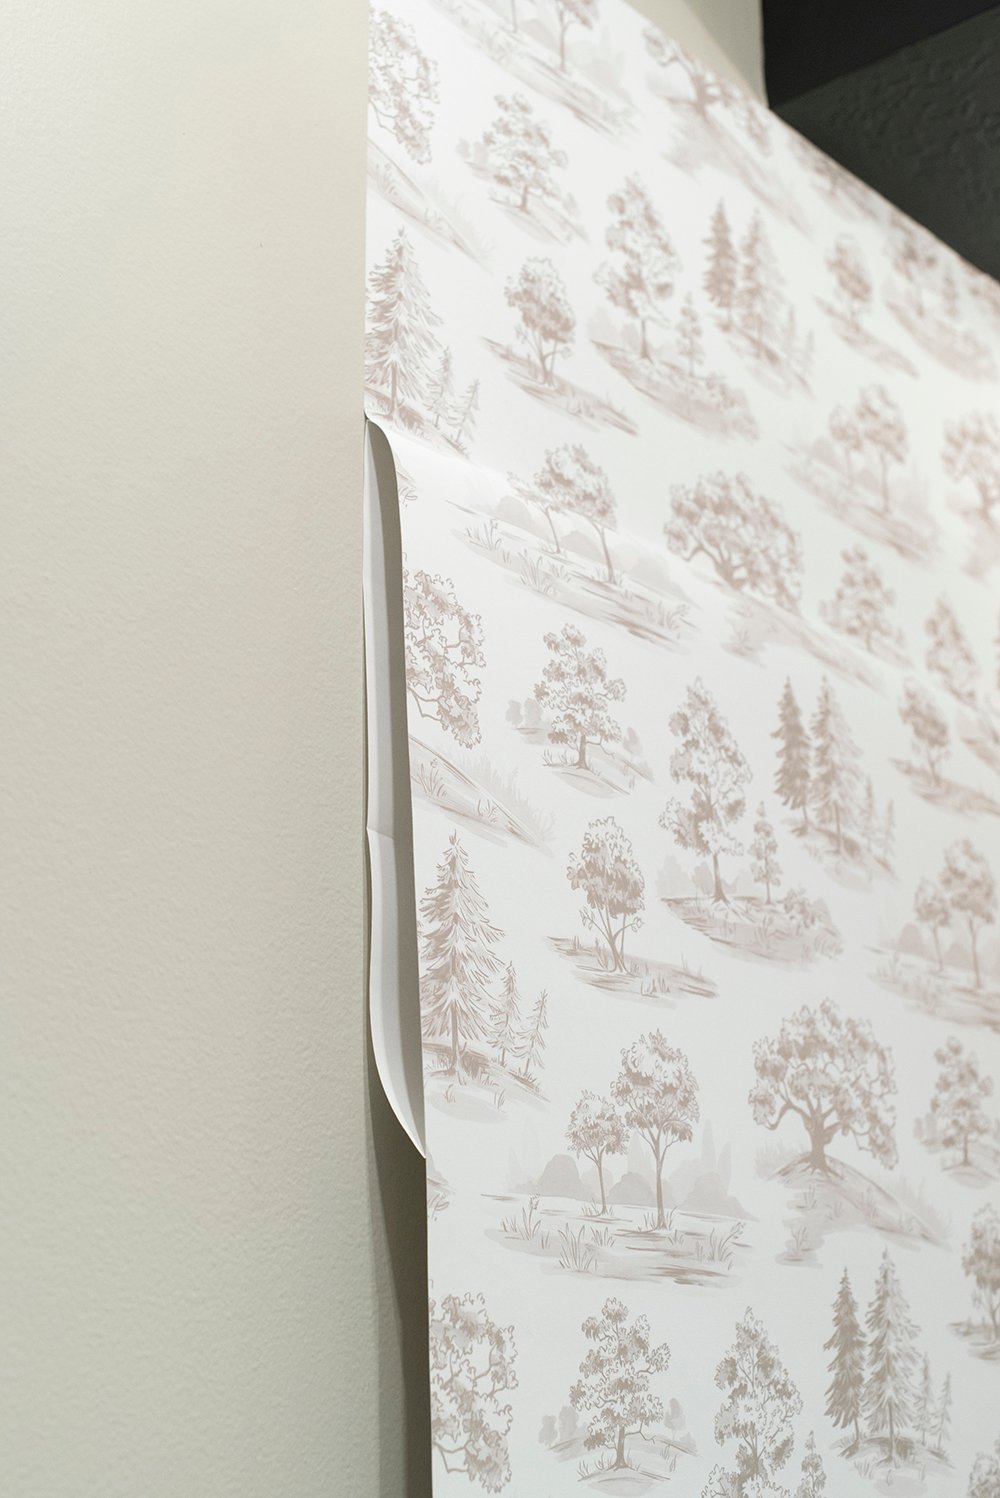 How to Install Peel-and-Stick Wallpaper - roomfortuesday.com